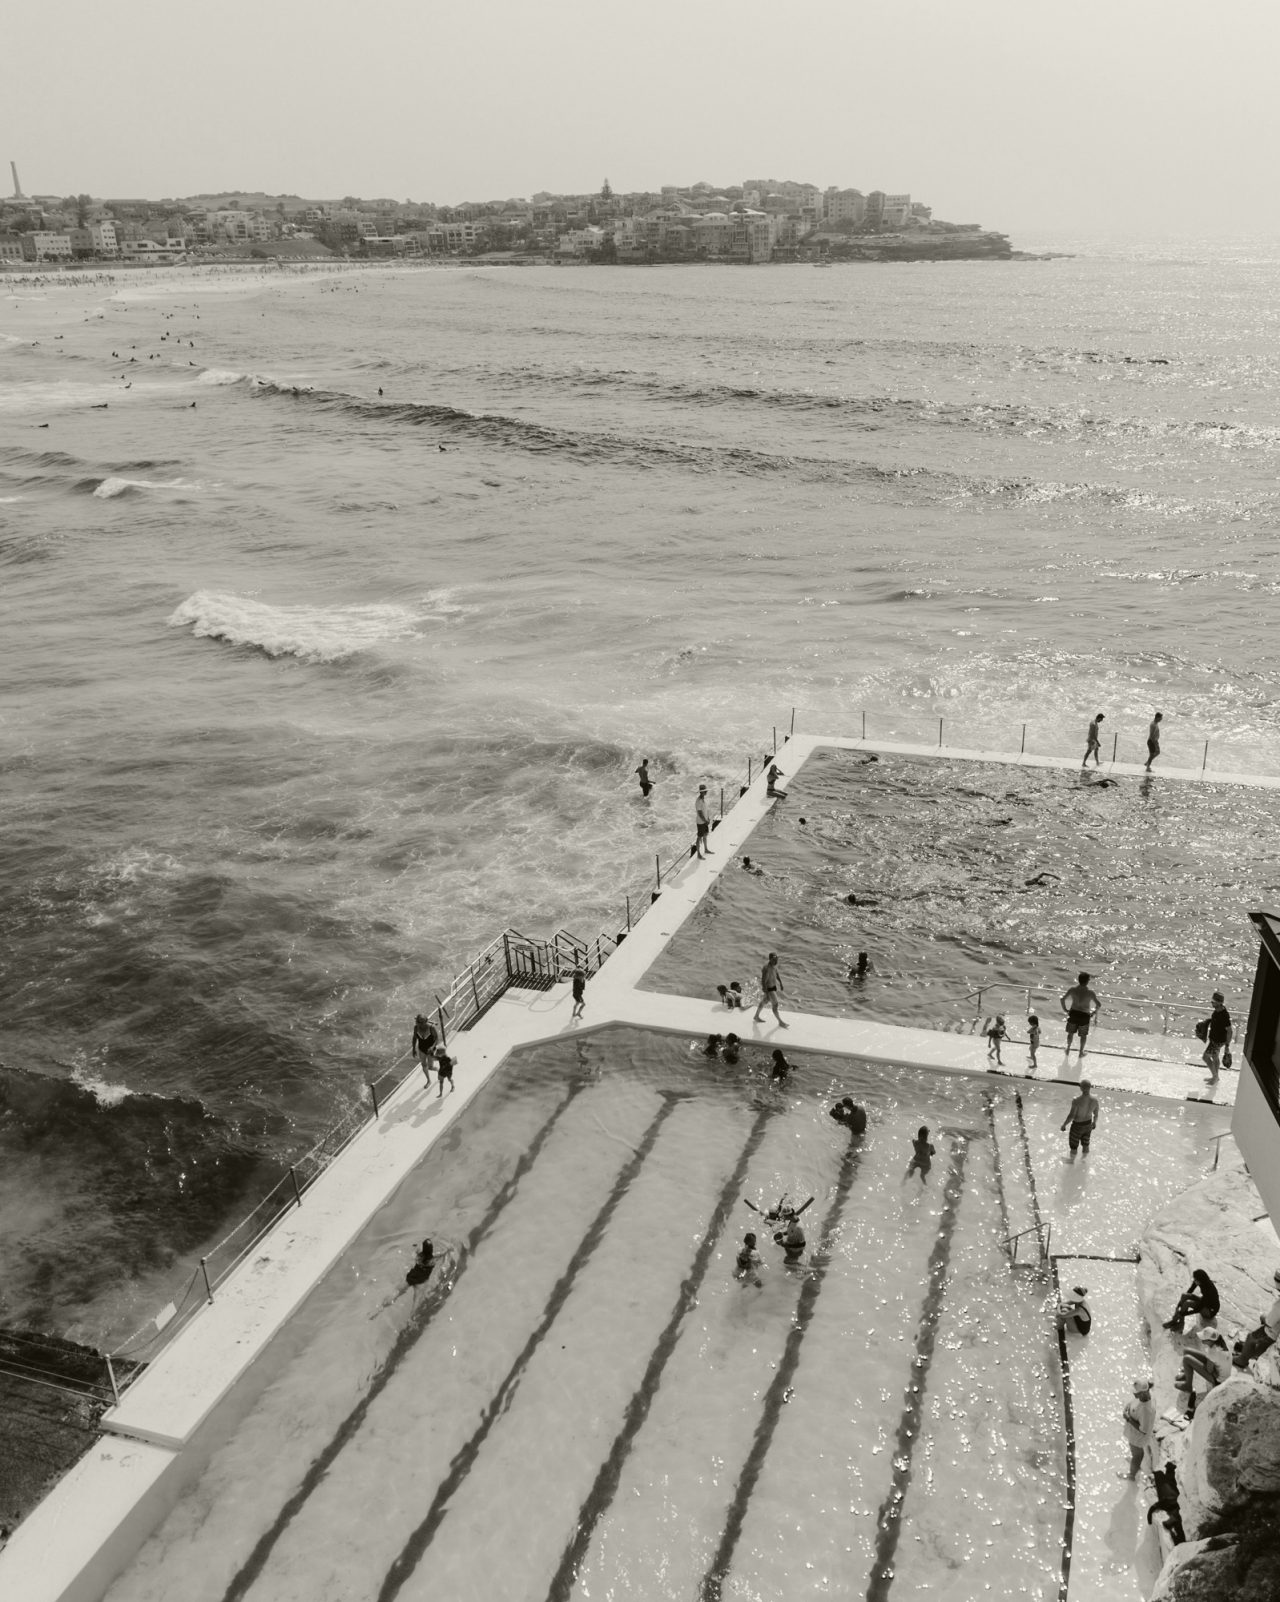 Black and white image of people swimming at a public beach in Sydney